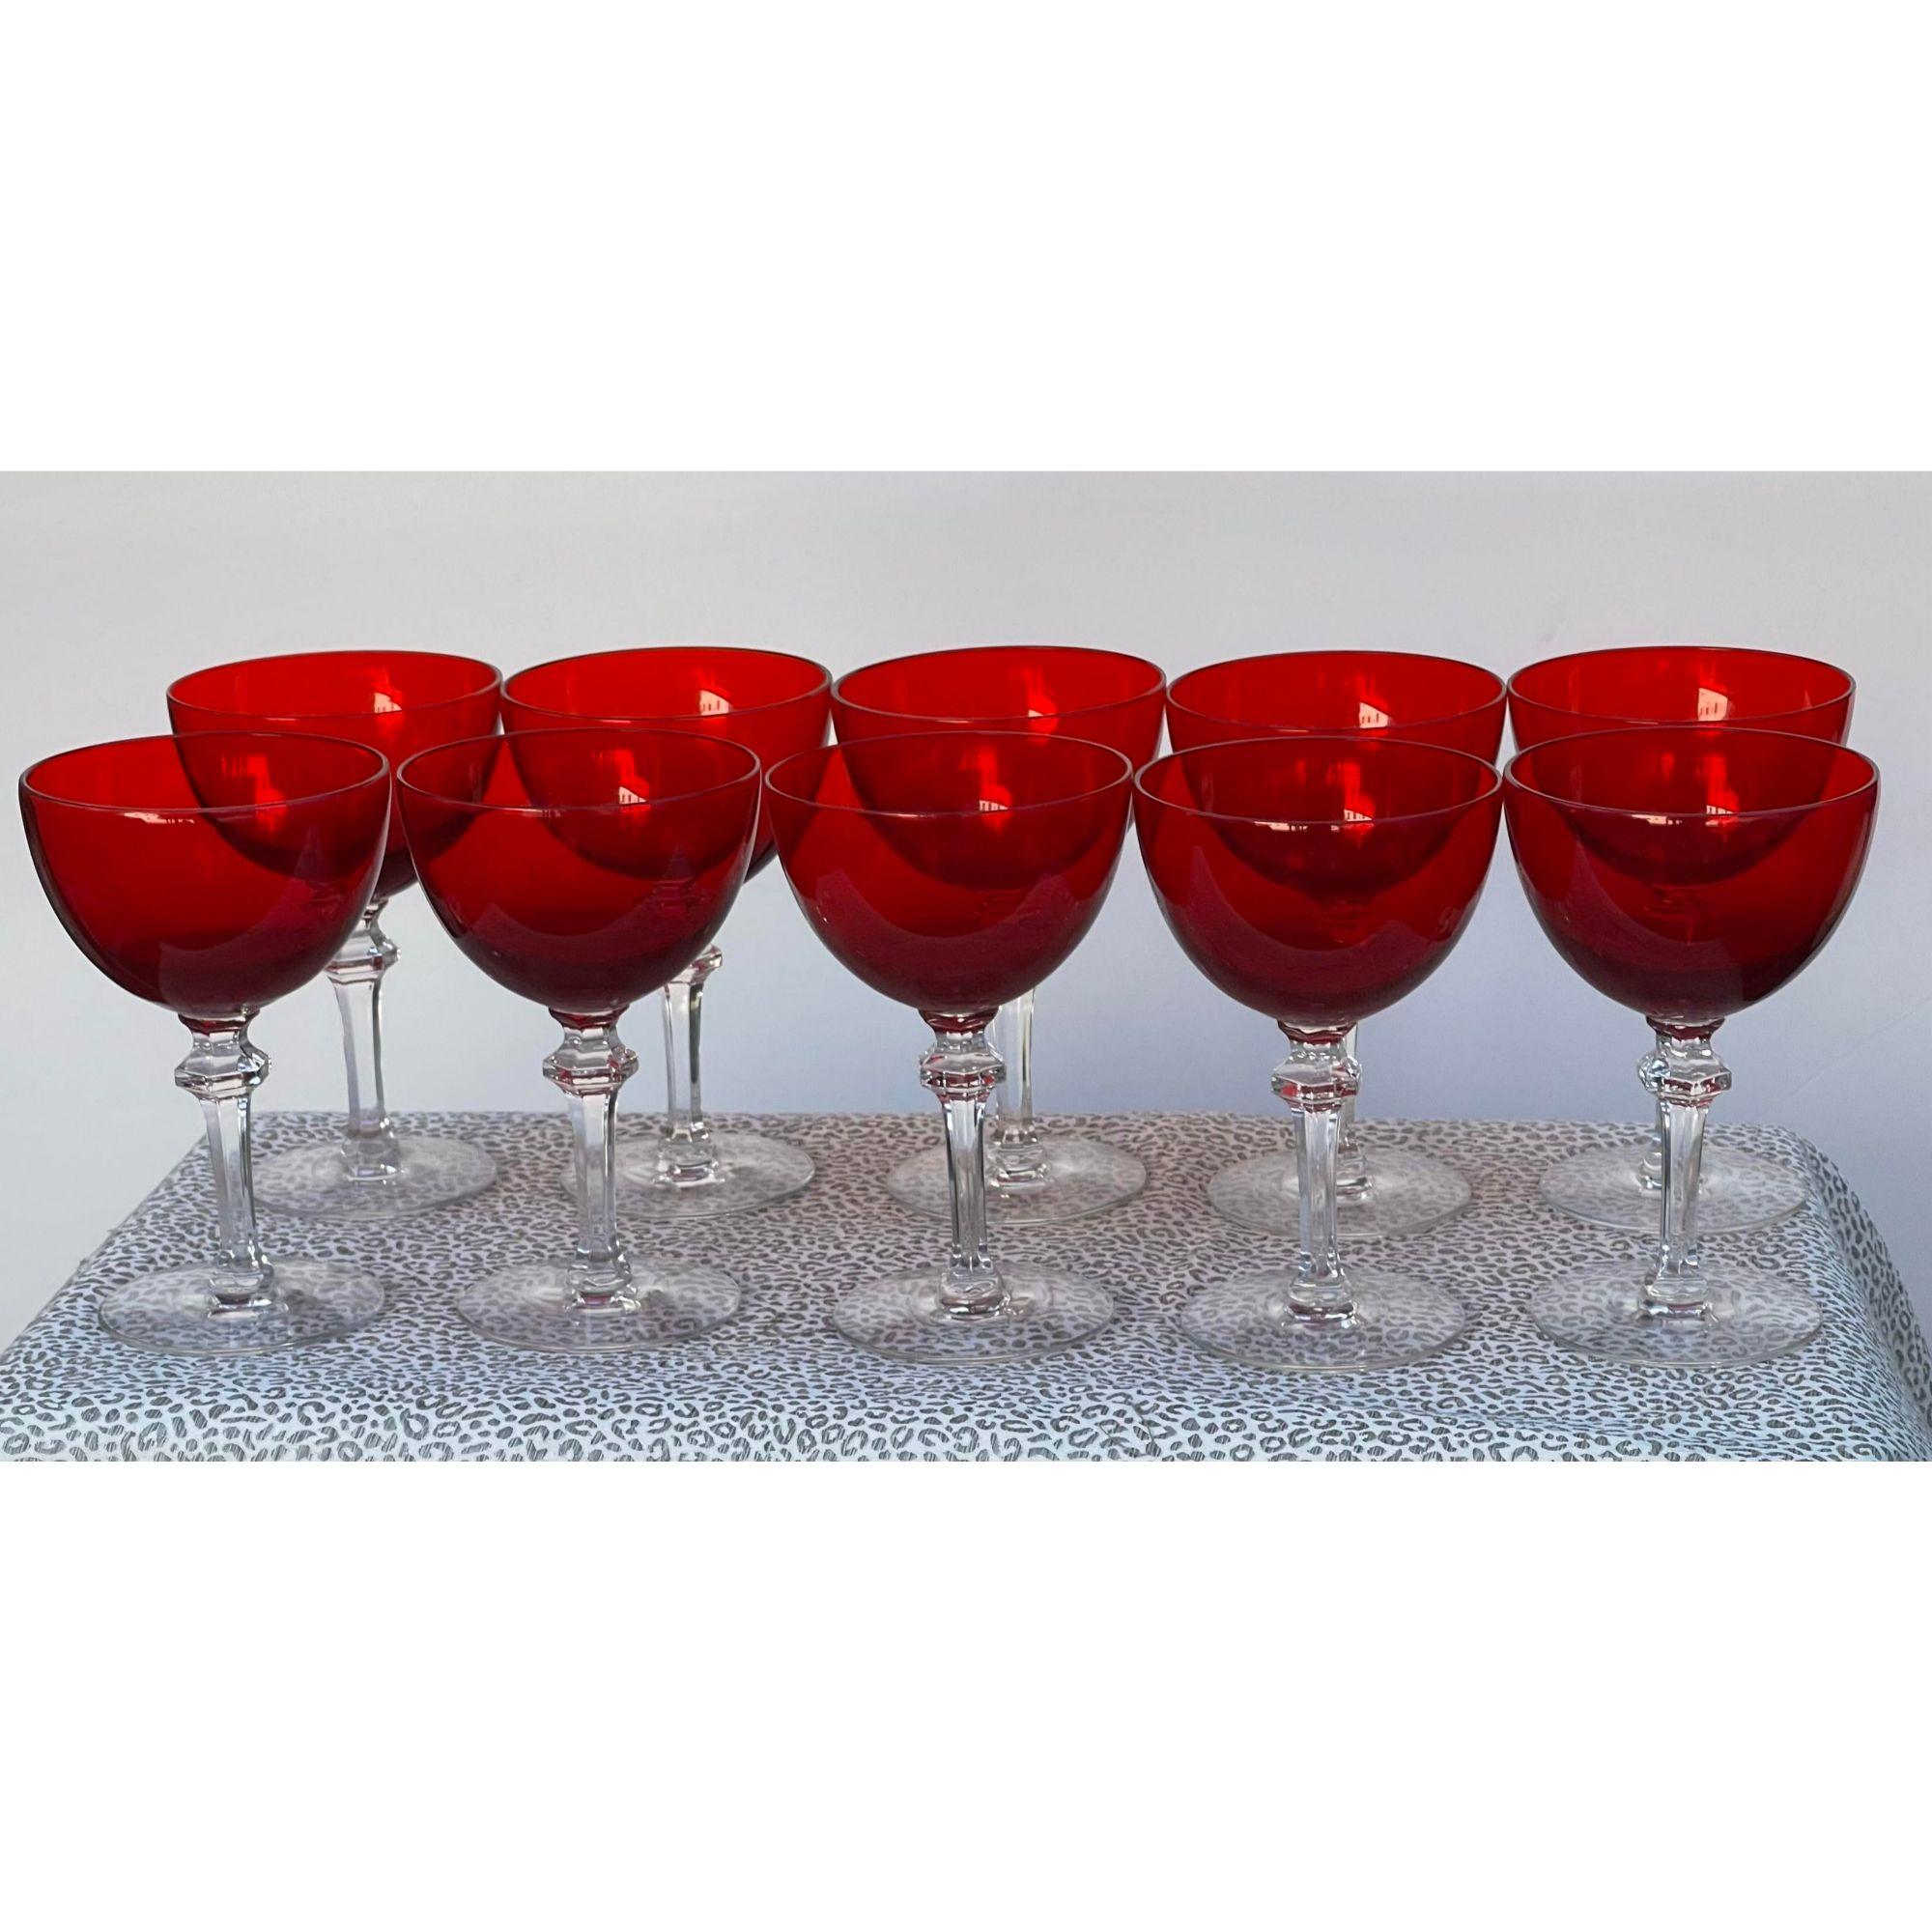 Antique Art Deco Morgantown red wine glasses champagne stems- Set of 10

Additional information:
Materials: Glass
Color: Red
Brand: Morgantown Glass
Designer: Morgantown Glass
Period: 1930s
Styles: Art Deco
Item Type: Vintage, Antique or